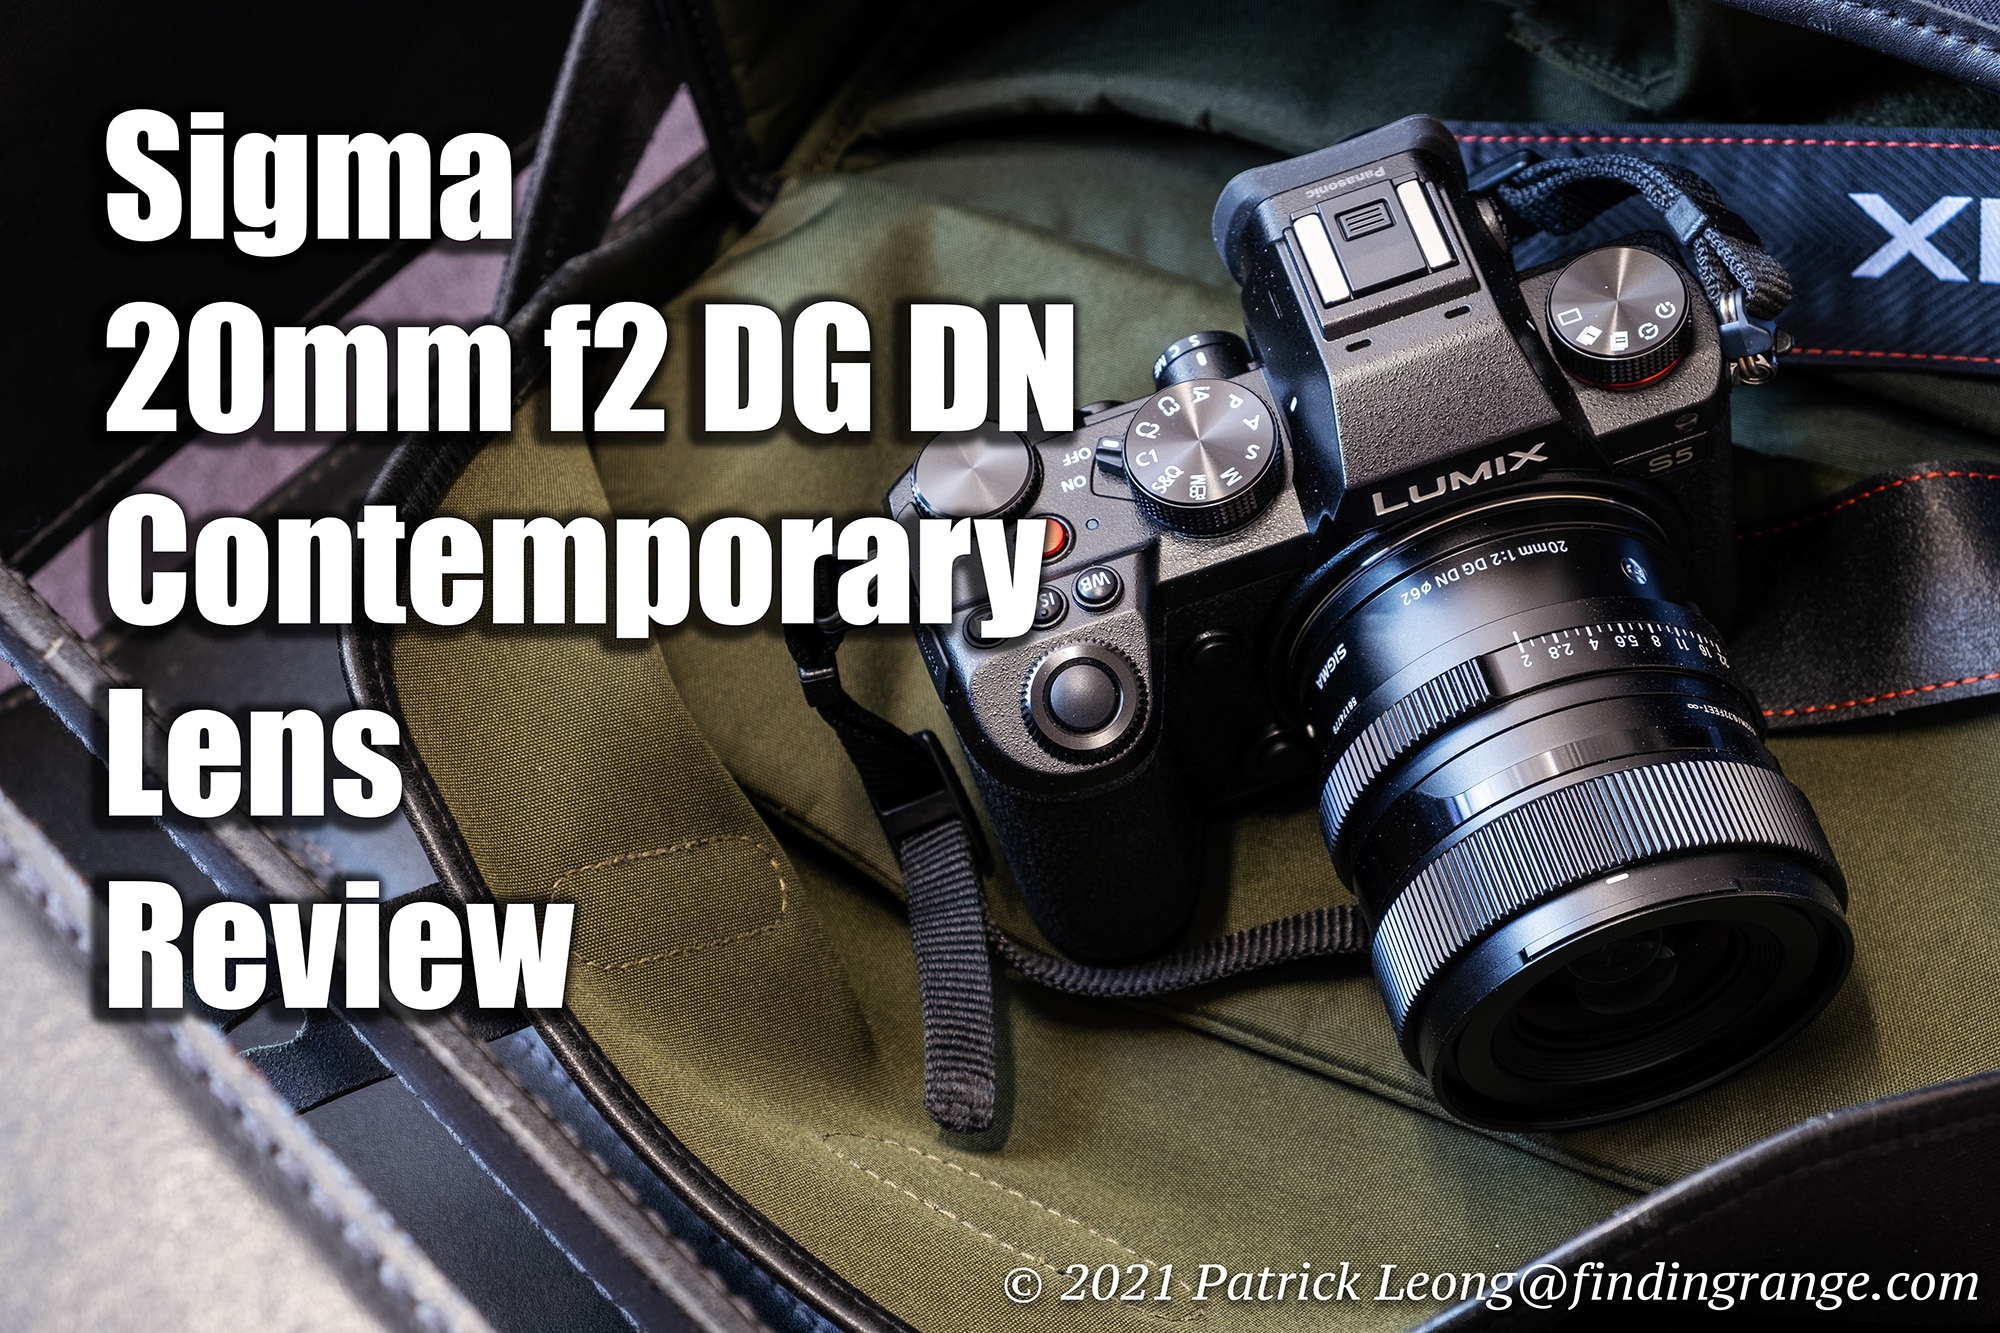 Sigma 20mm F2 DG DN Contemporary Lens Review - Finding Range